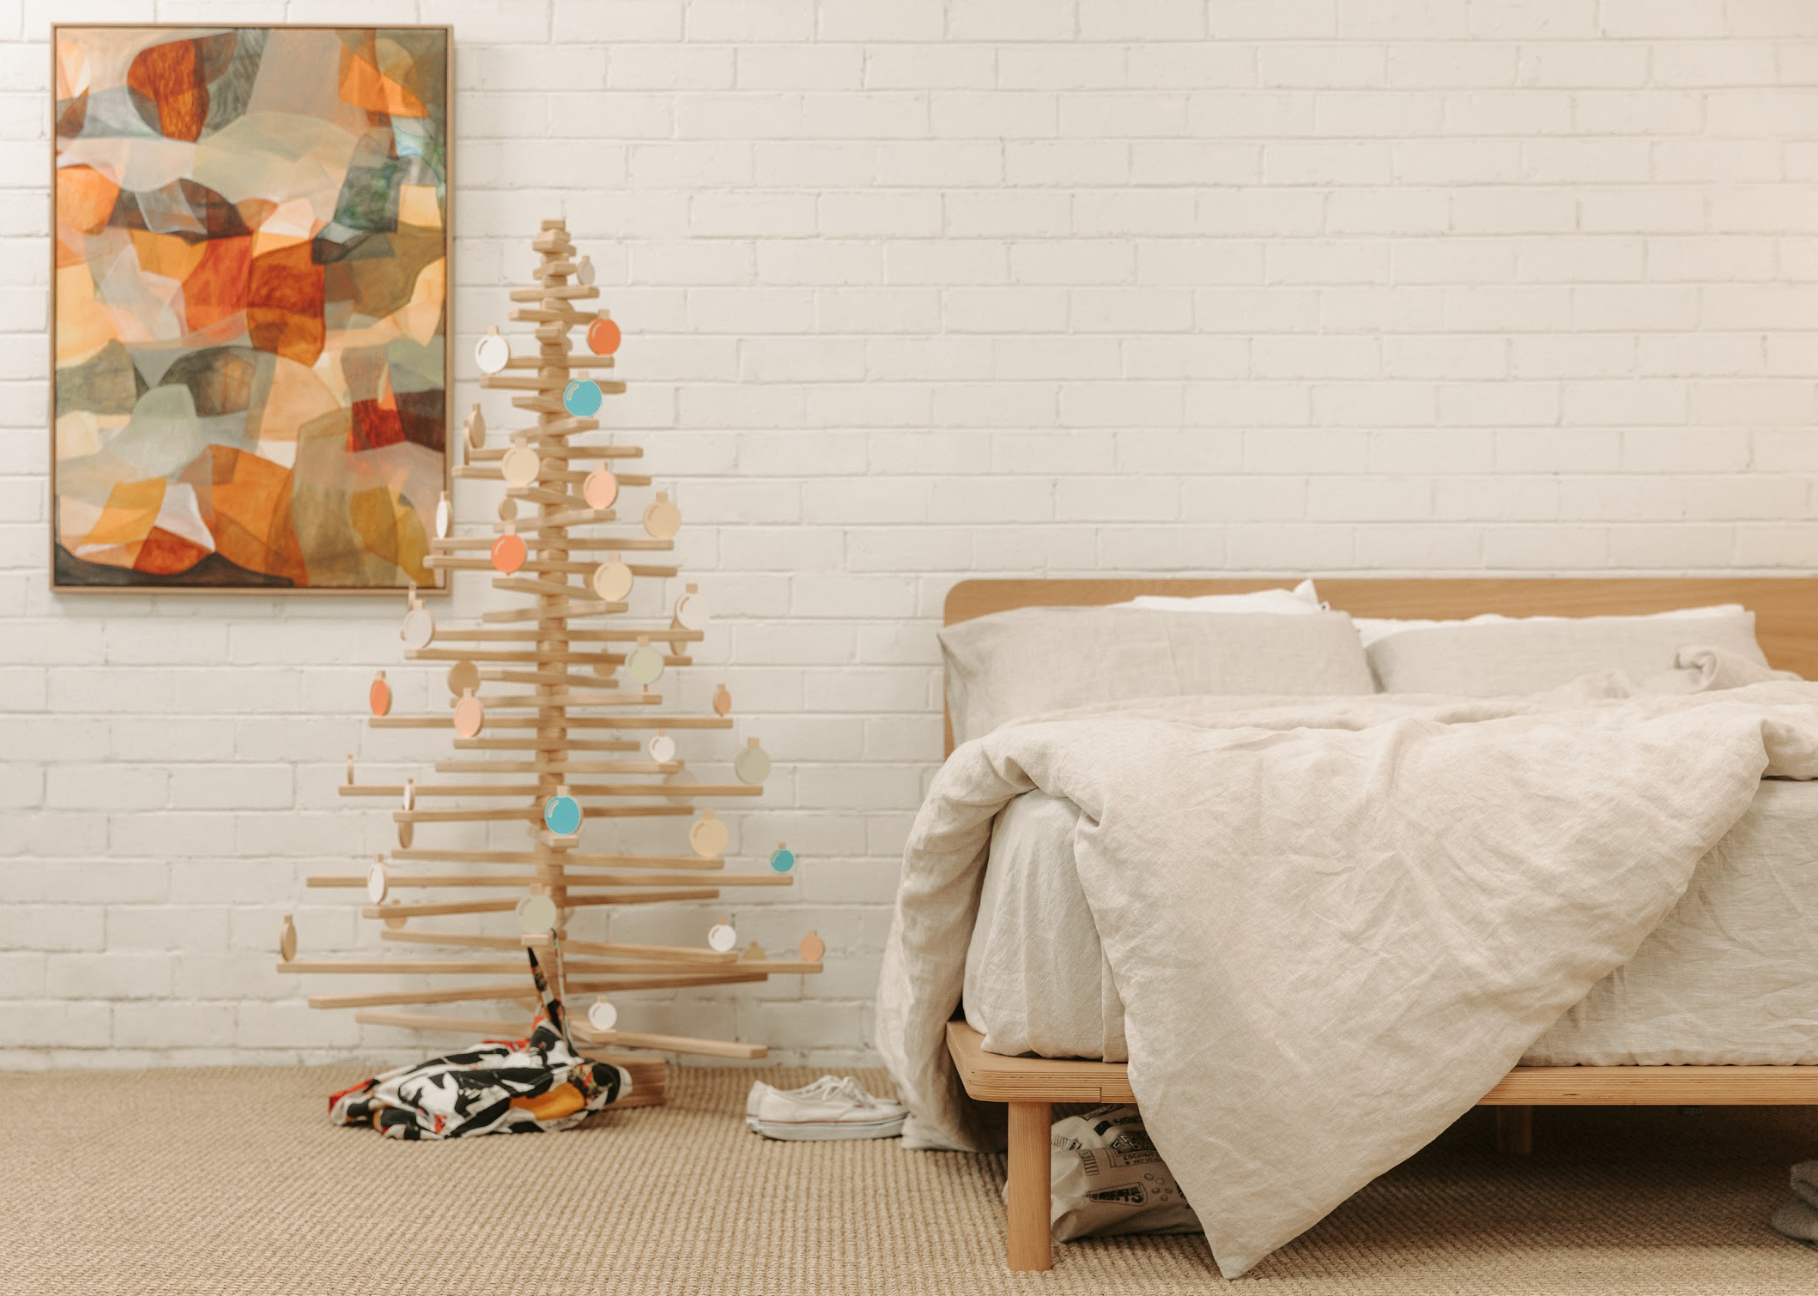 Tips for styling the Christmas tree